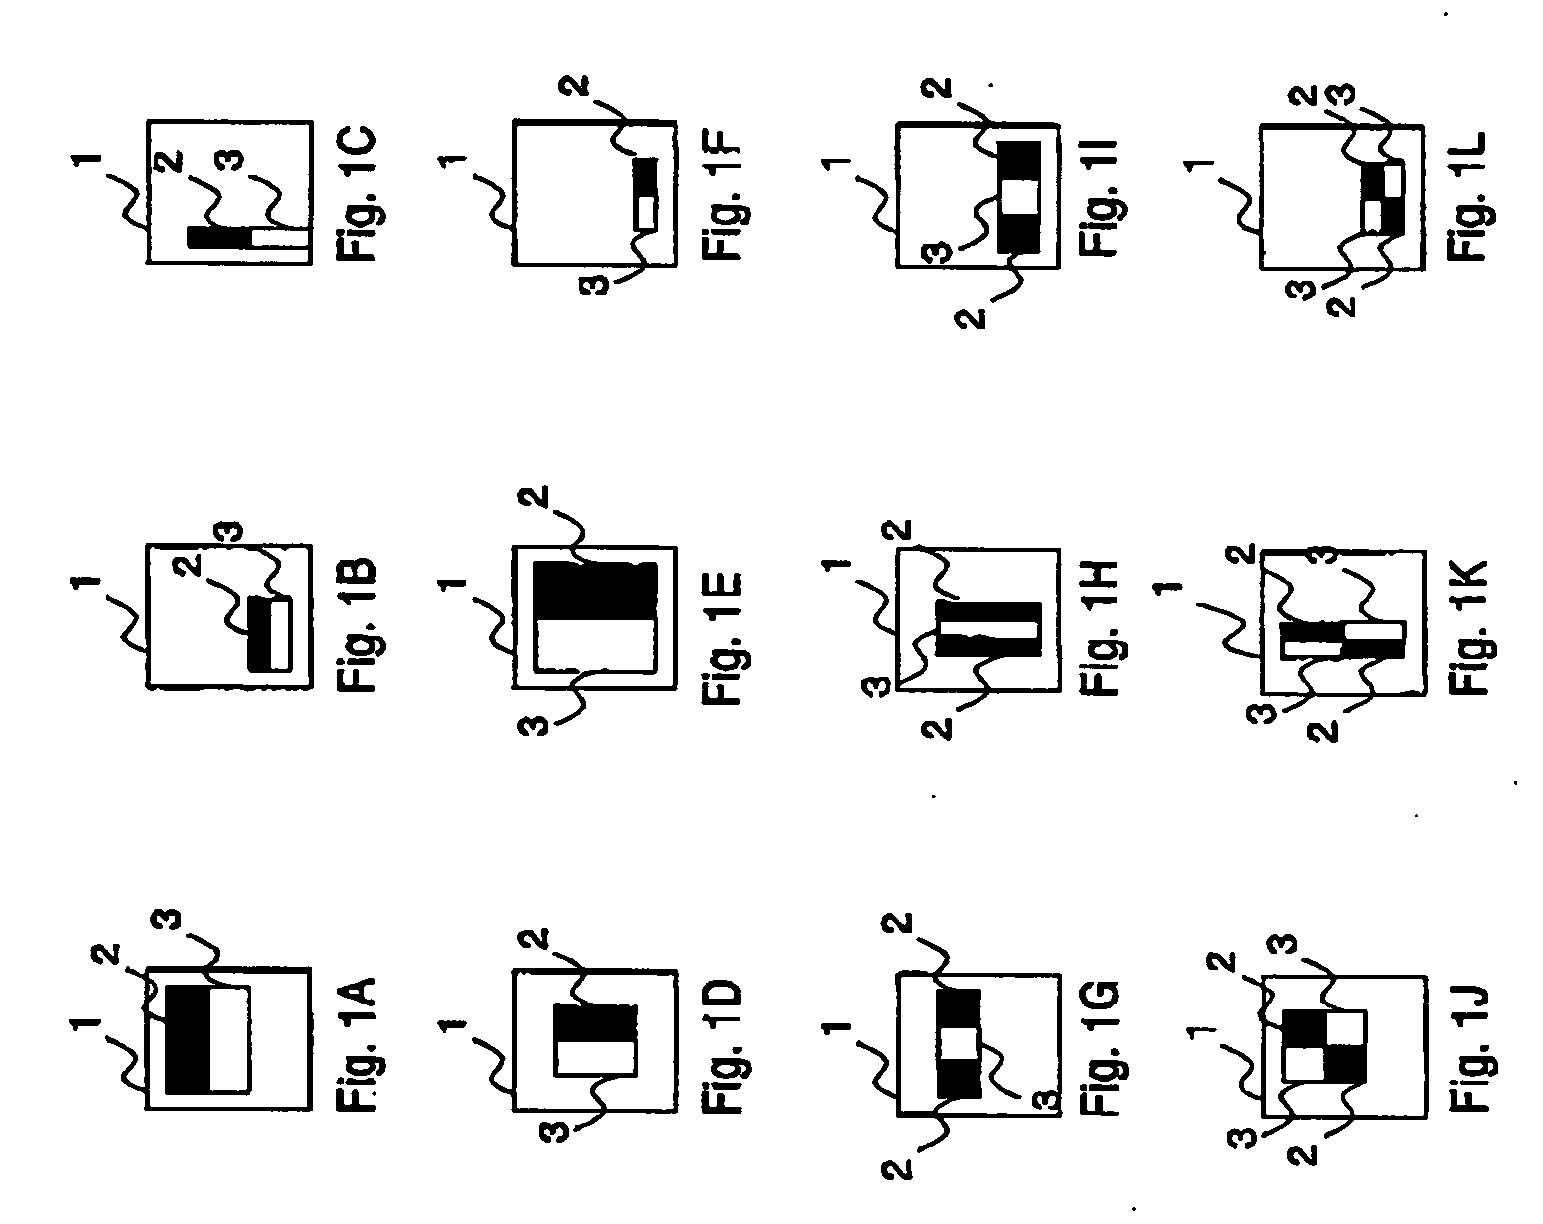 Specified object detection apparatus